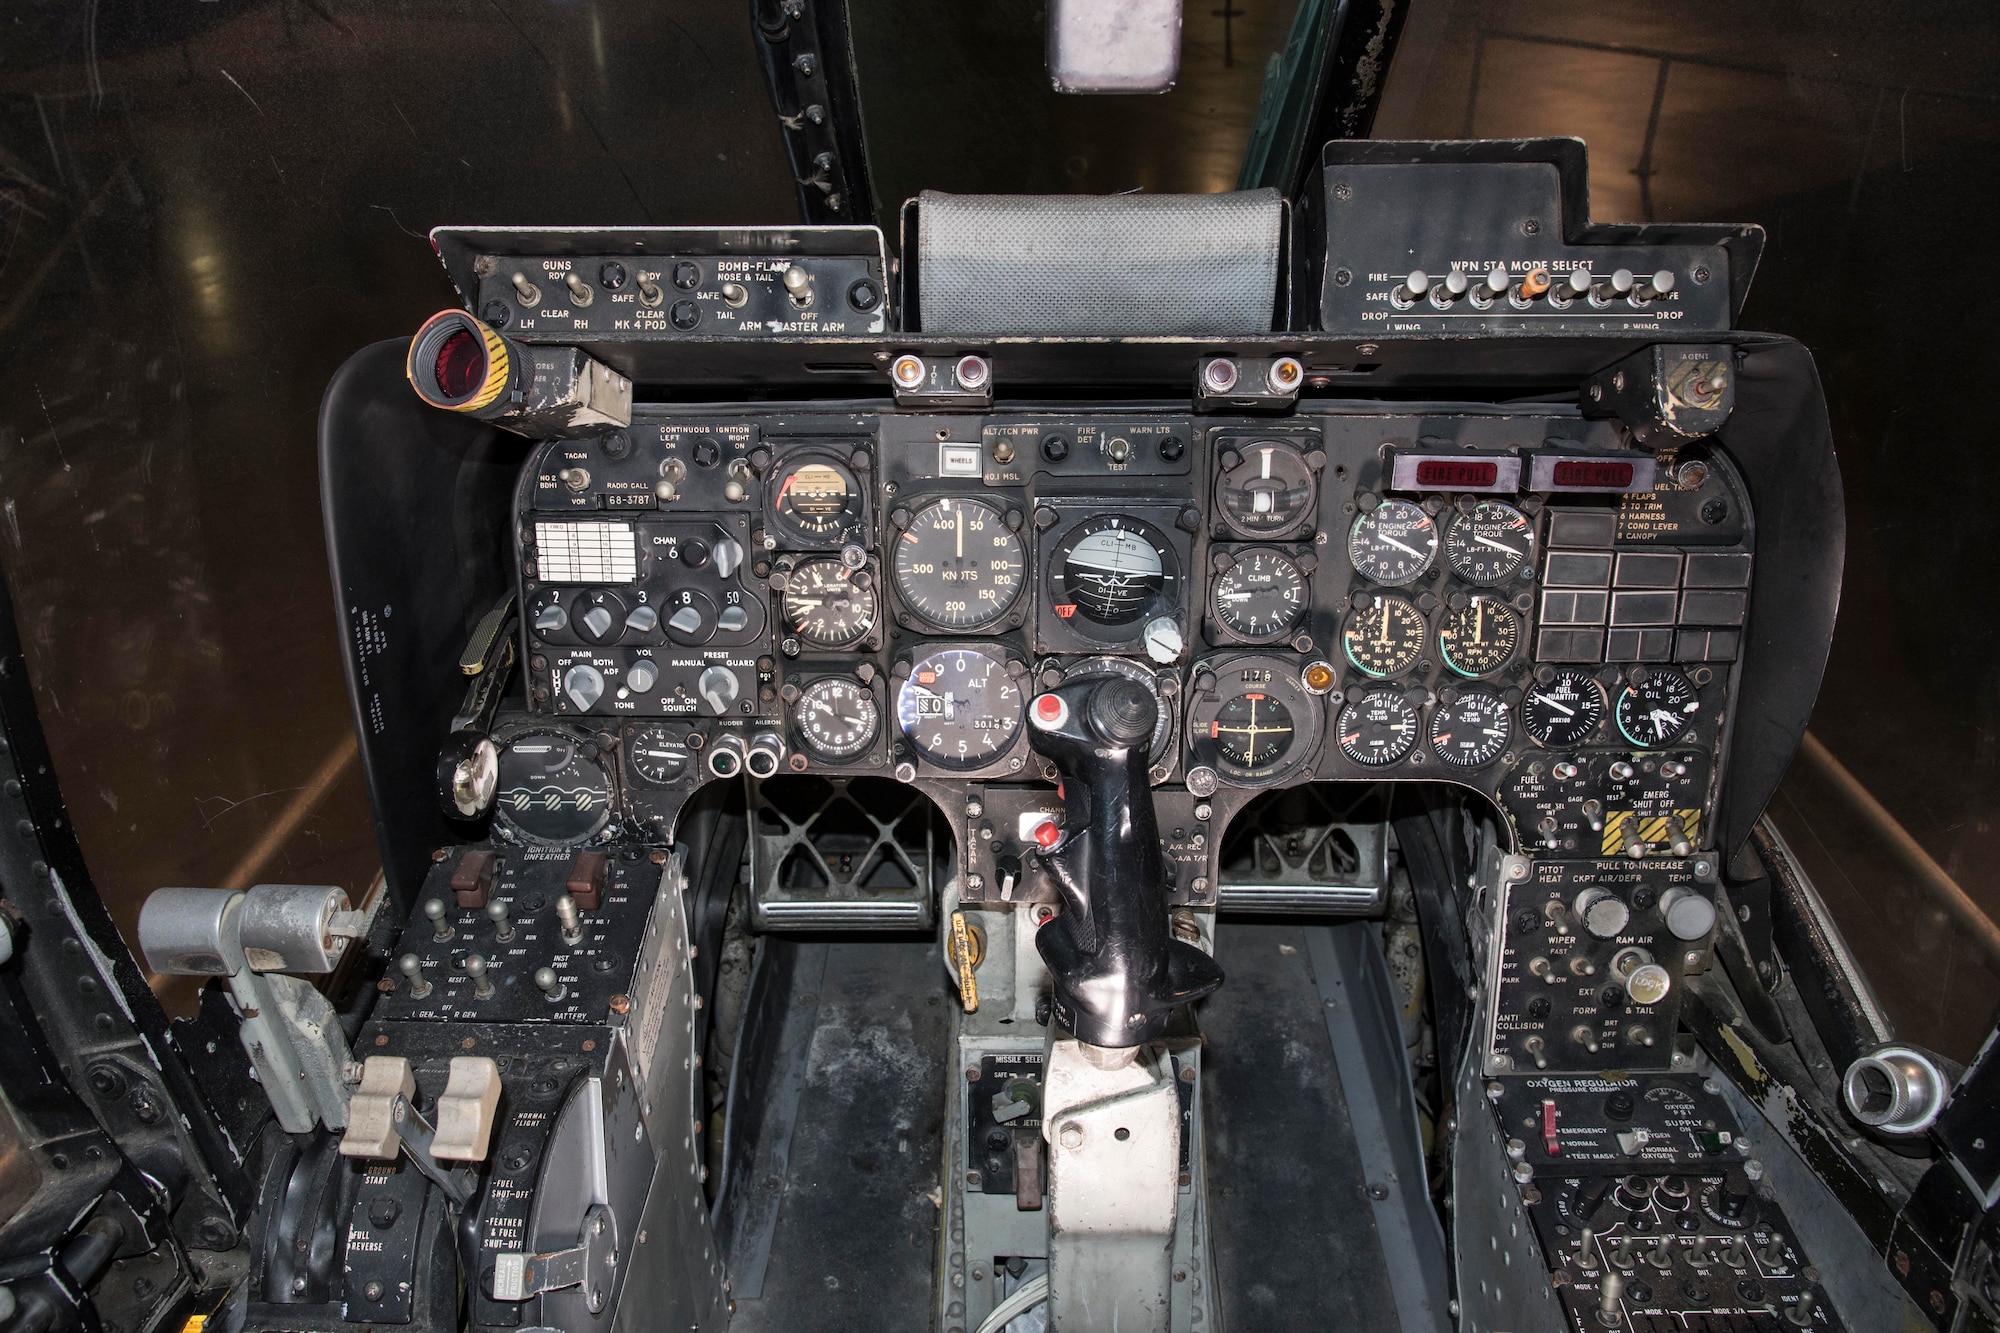 DAYTON, Ohio -- North American Rockwell OV-10A front cockpit in the Southeast Asia War Gallery at the National Museum of the United States Air Force. (U.S. Air Force photo by Ken LaRock)